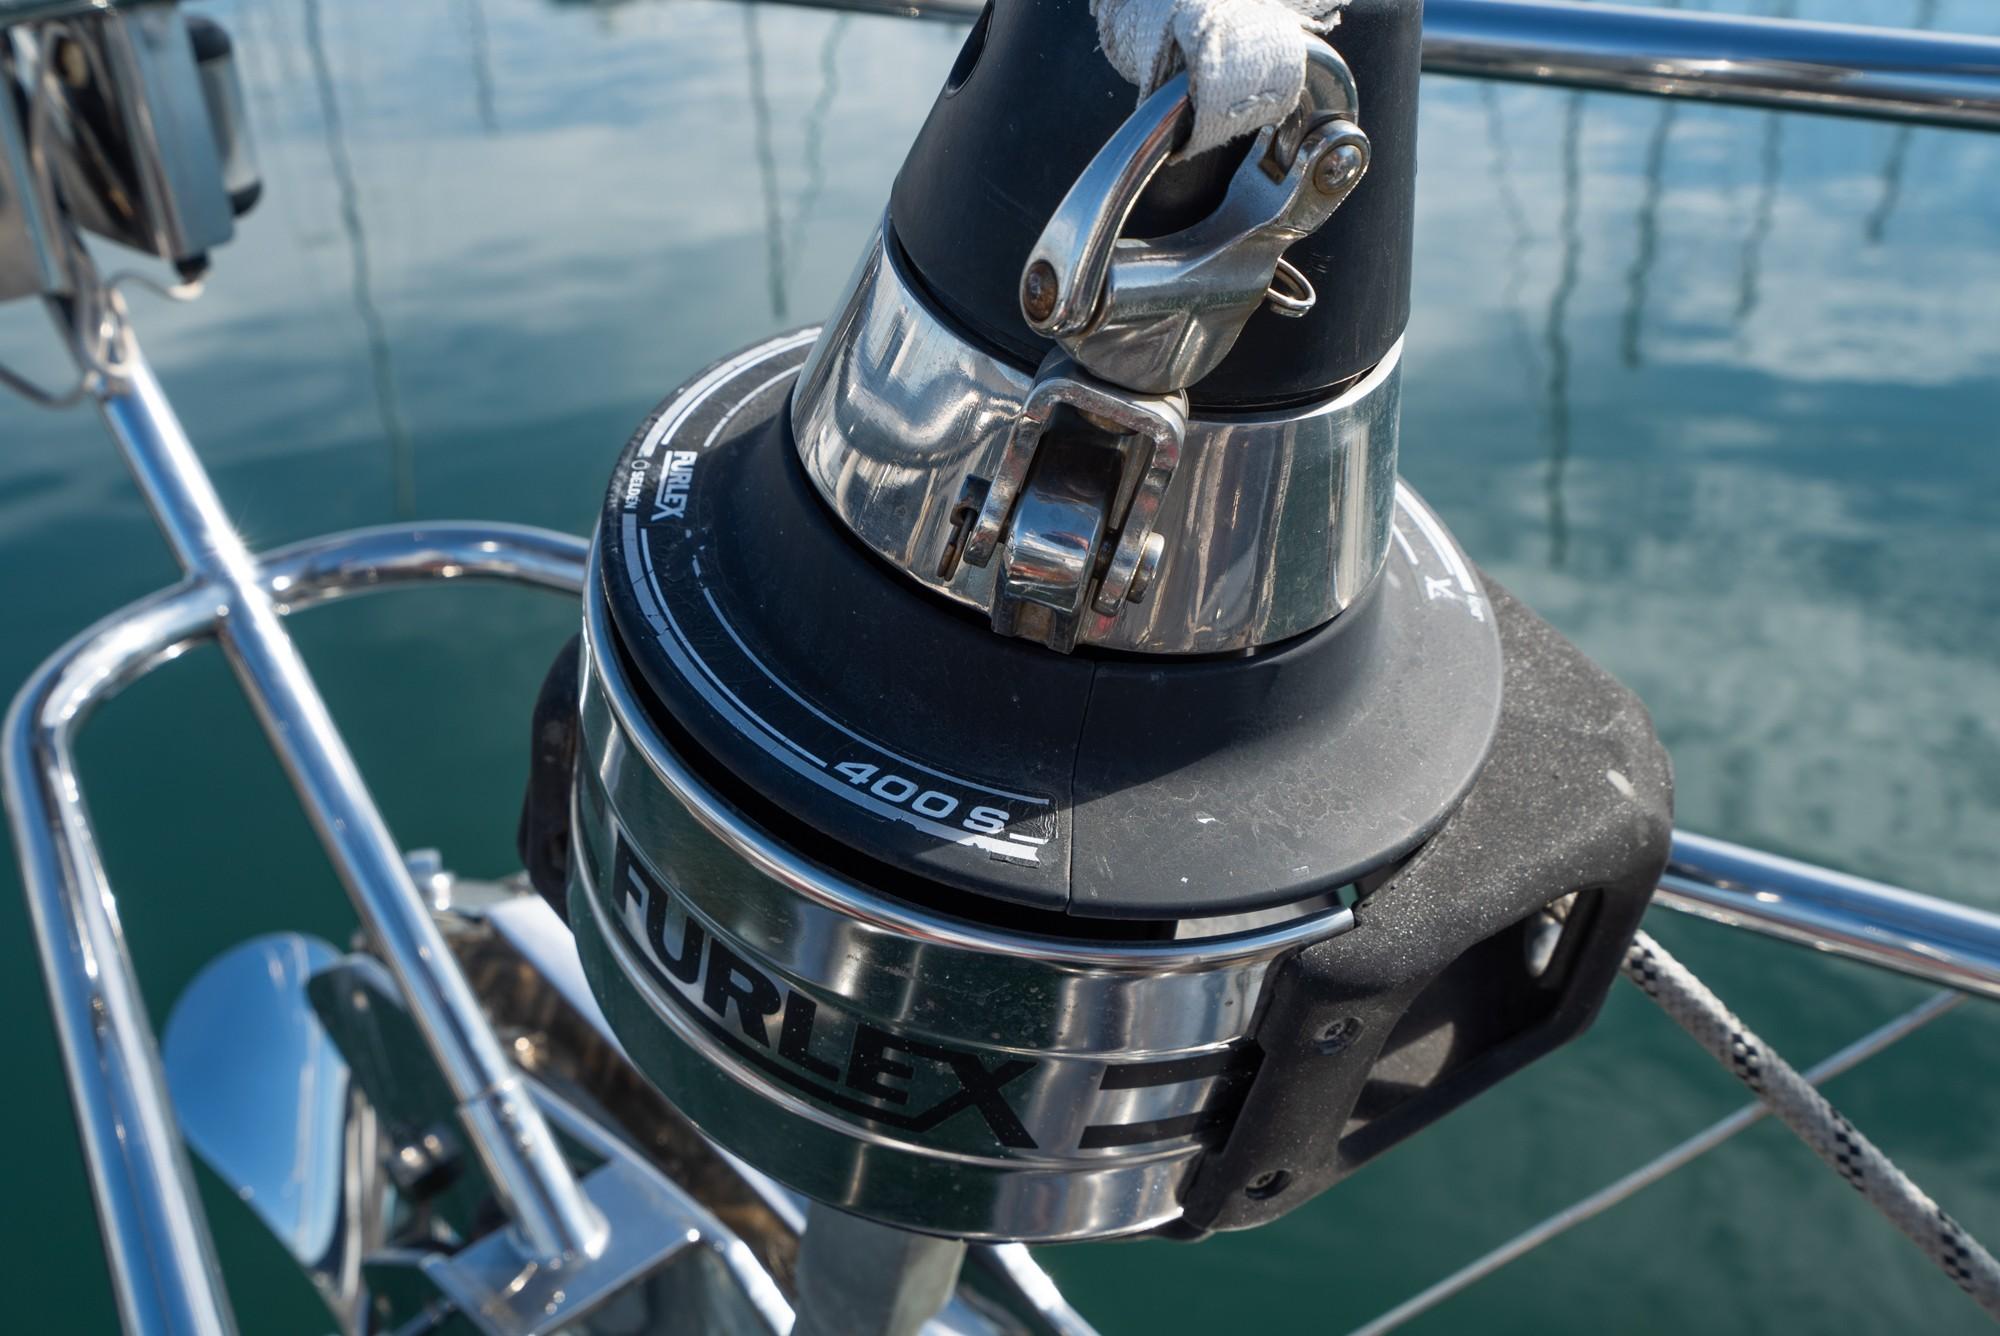 Shimano Reels for sale in San Diego, California